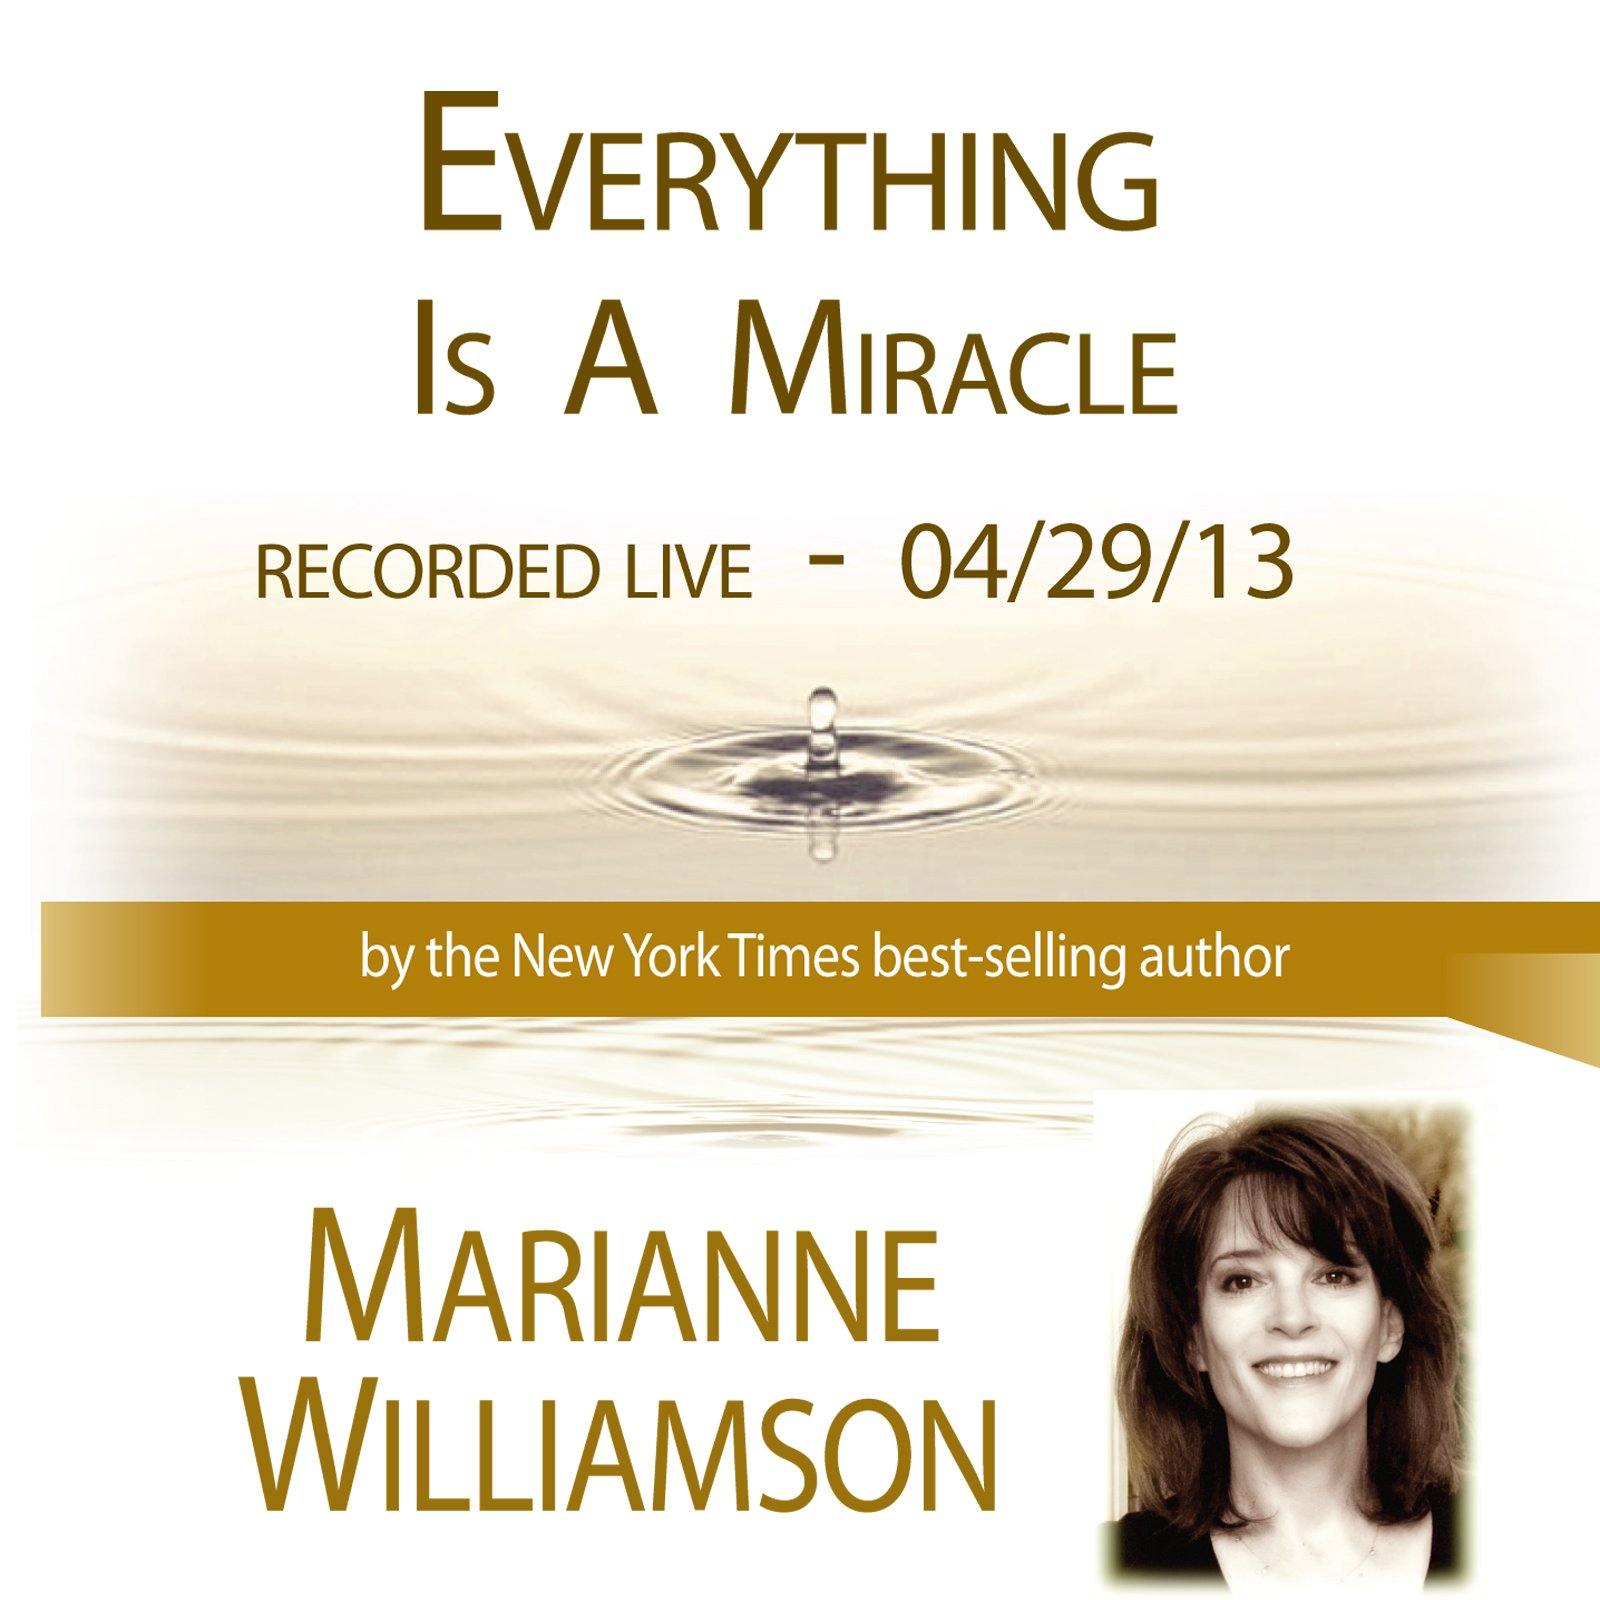 Everything Is A Miracle with Marianne Williamson Audio Program Marianne Williamson - BetterListen!